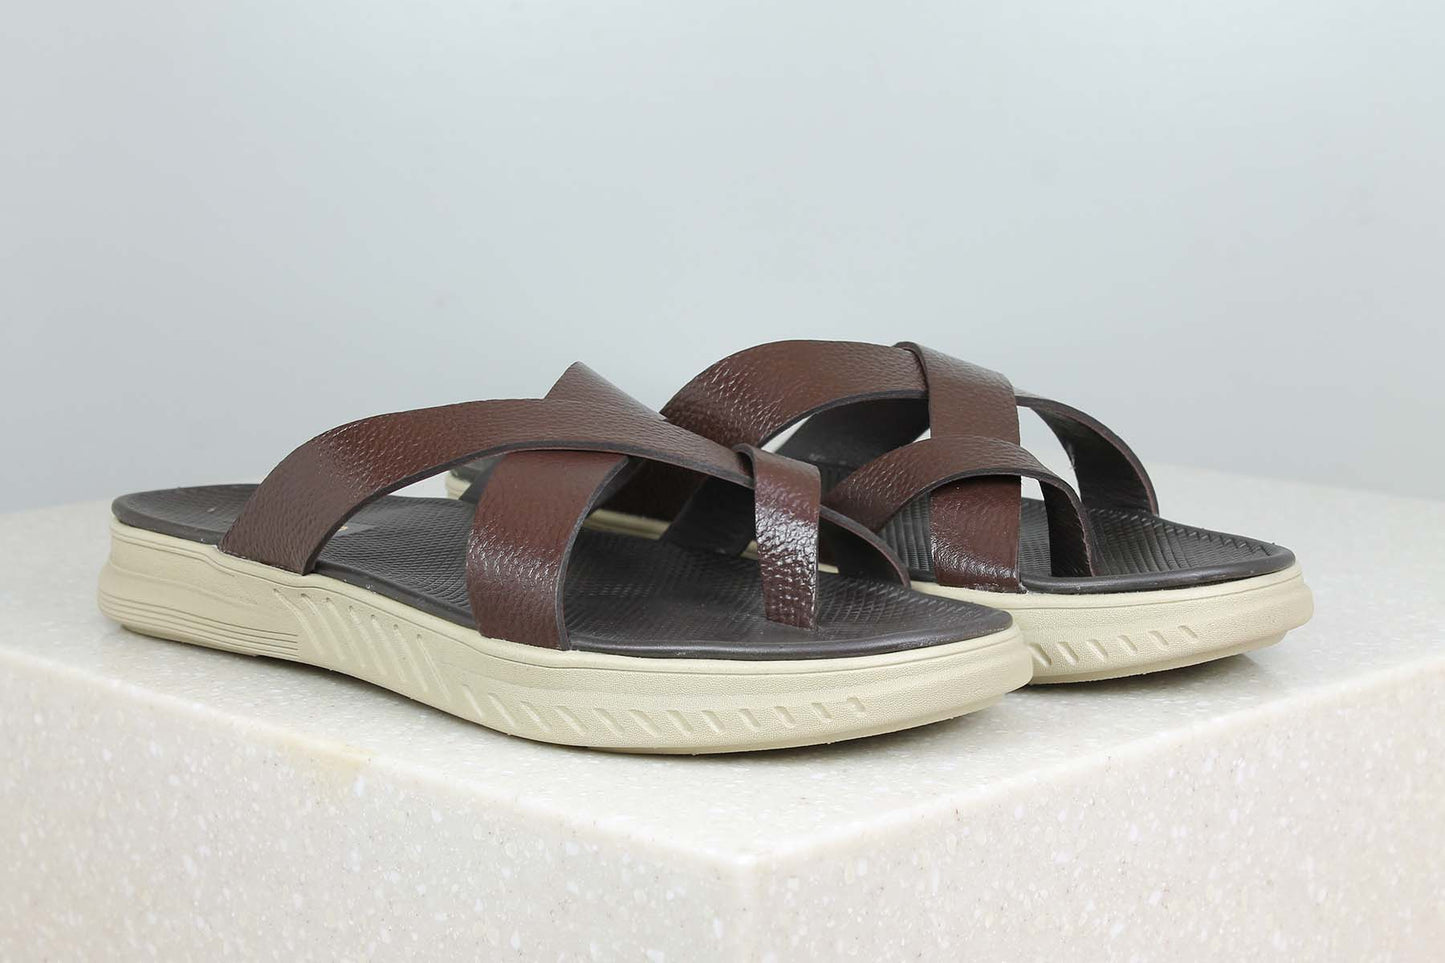 THONG CASUAL SLIPPER-BROWN-Men's Slippers-Inc5 Shoes